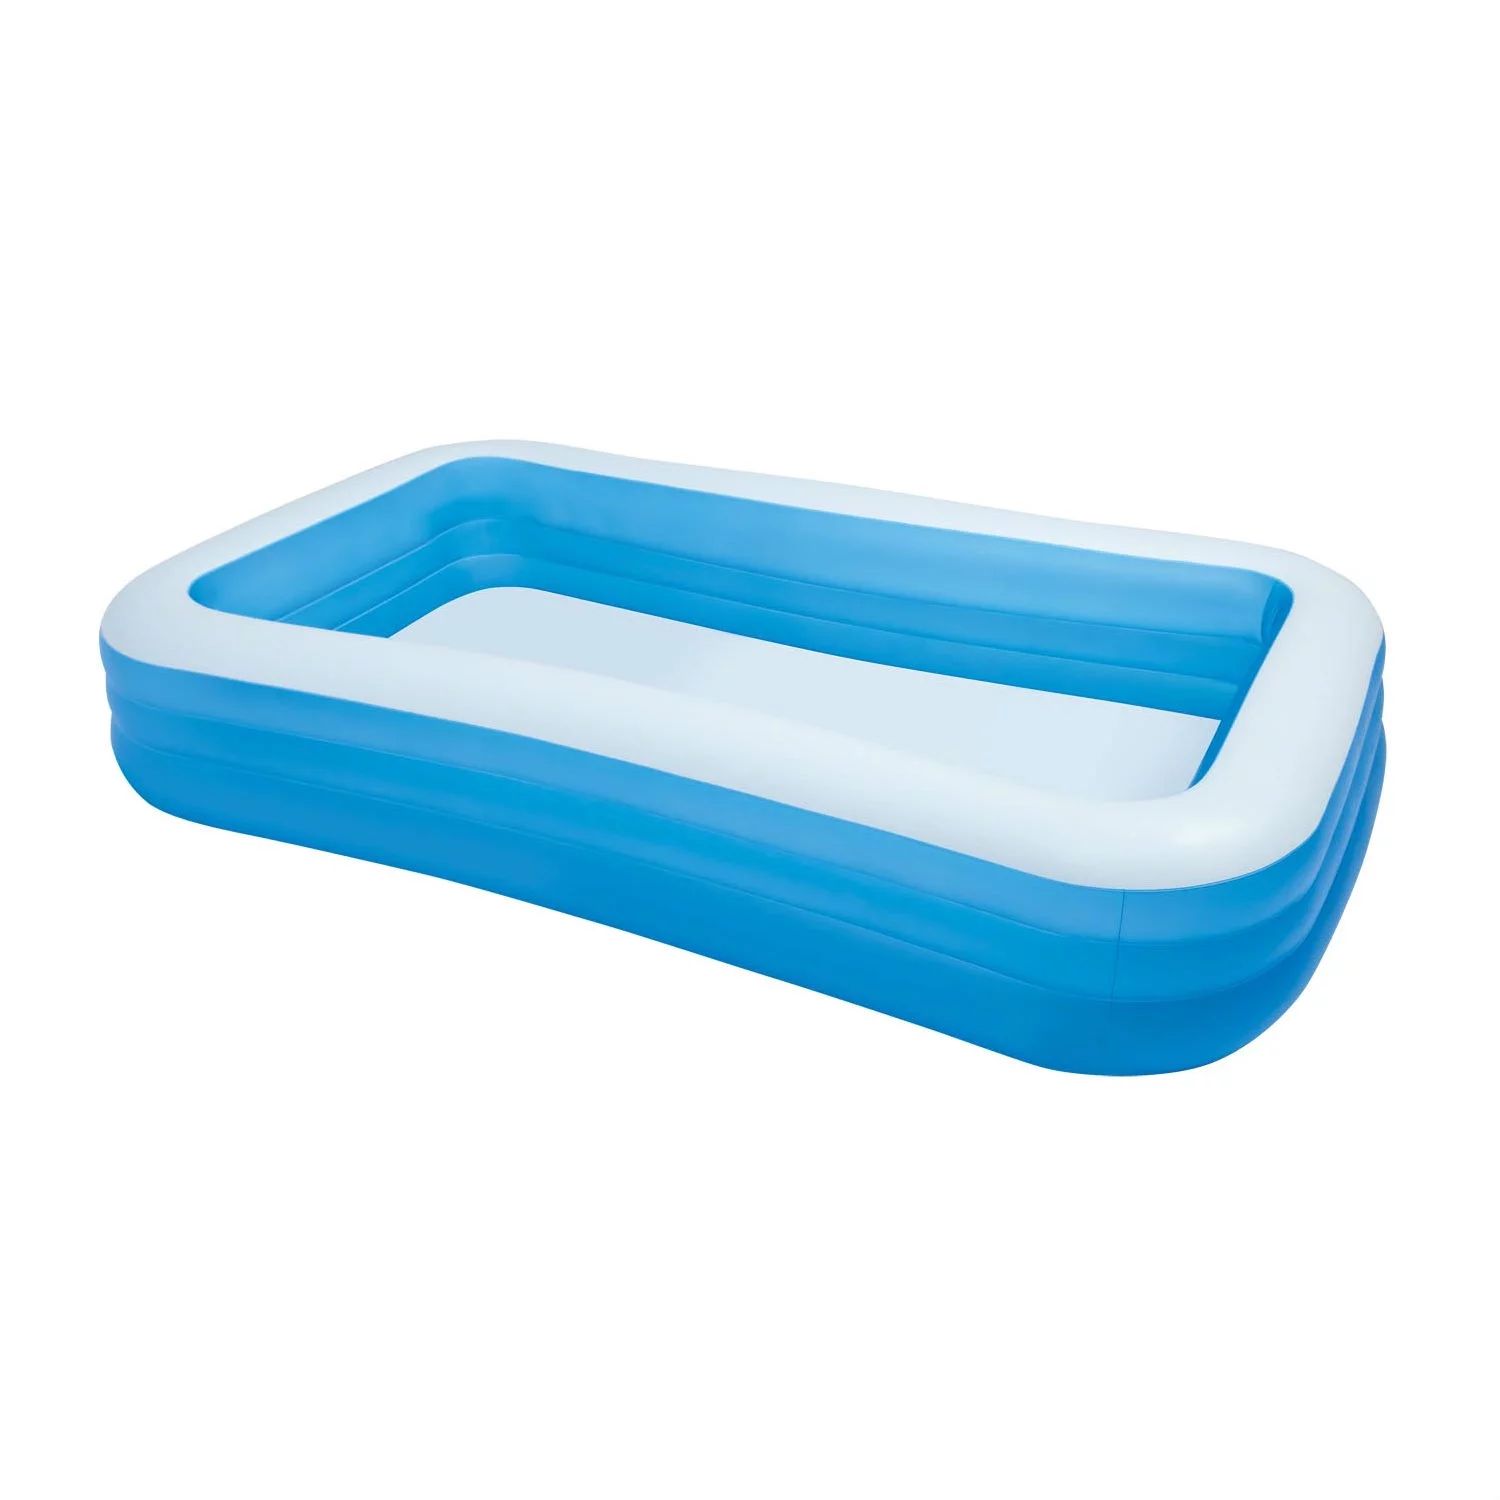 Intex Inflatable Swim Center Family Lounge Pool, 120" x 72" x 22" - Colors may vary. | Walmart (US)